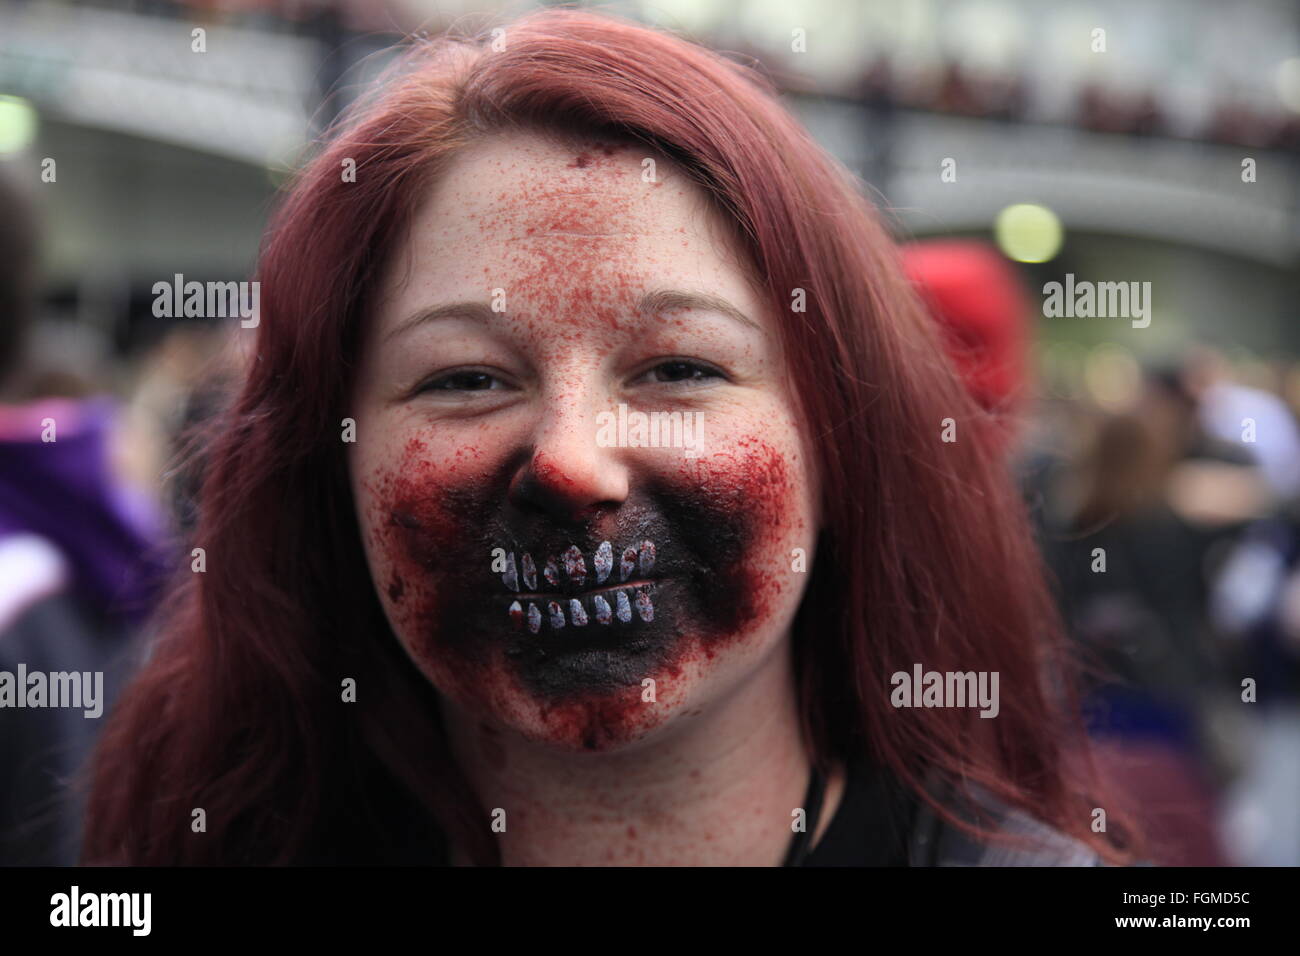 London, UK. 21st February, 2016. Walking Dead Convention Walker Stalker Con Olympia London 21/02/2016 walking dead fans gather to see stars of the show and stalls selling everything to do with the hit zombie American show photo ops with a star or zombie. cosplayers & undead walkers roaming the event floor entertaining the crowds. Stalls selling make-up and characters from the show. Credit:  Paul Thompson/Alamy Live News Stock Photo